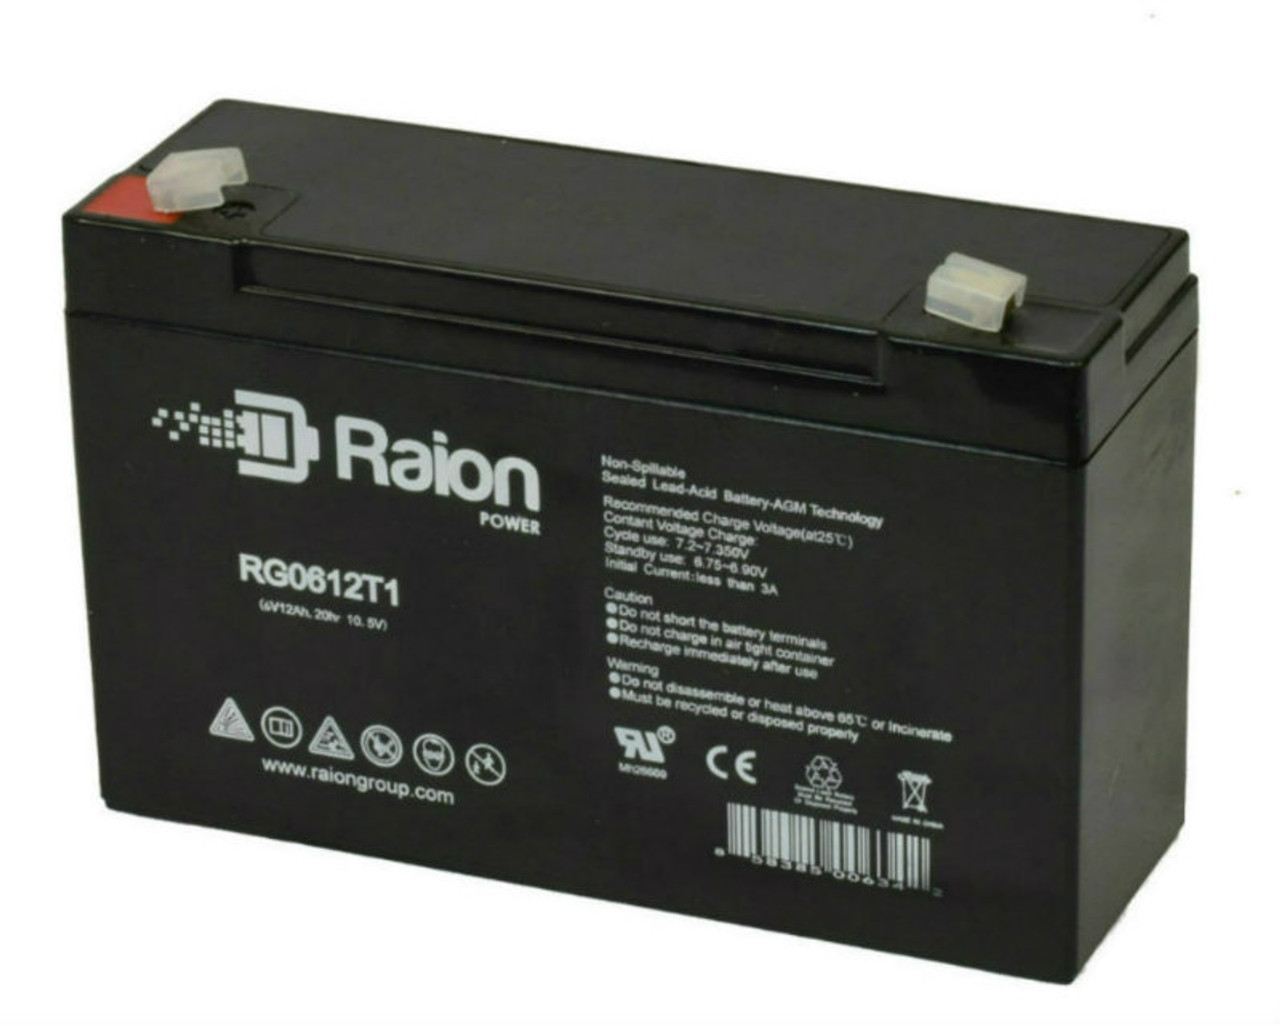 Raion Power RG06120T1 Replacement 6V 12Ah Emergency Light Battery for Power Cell PC6120